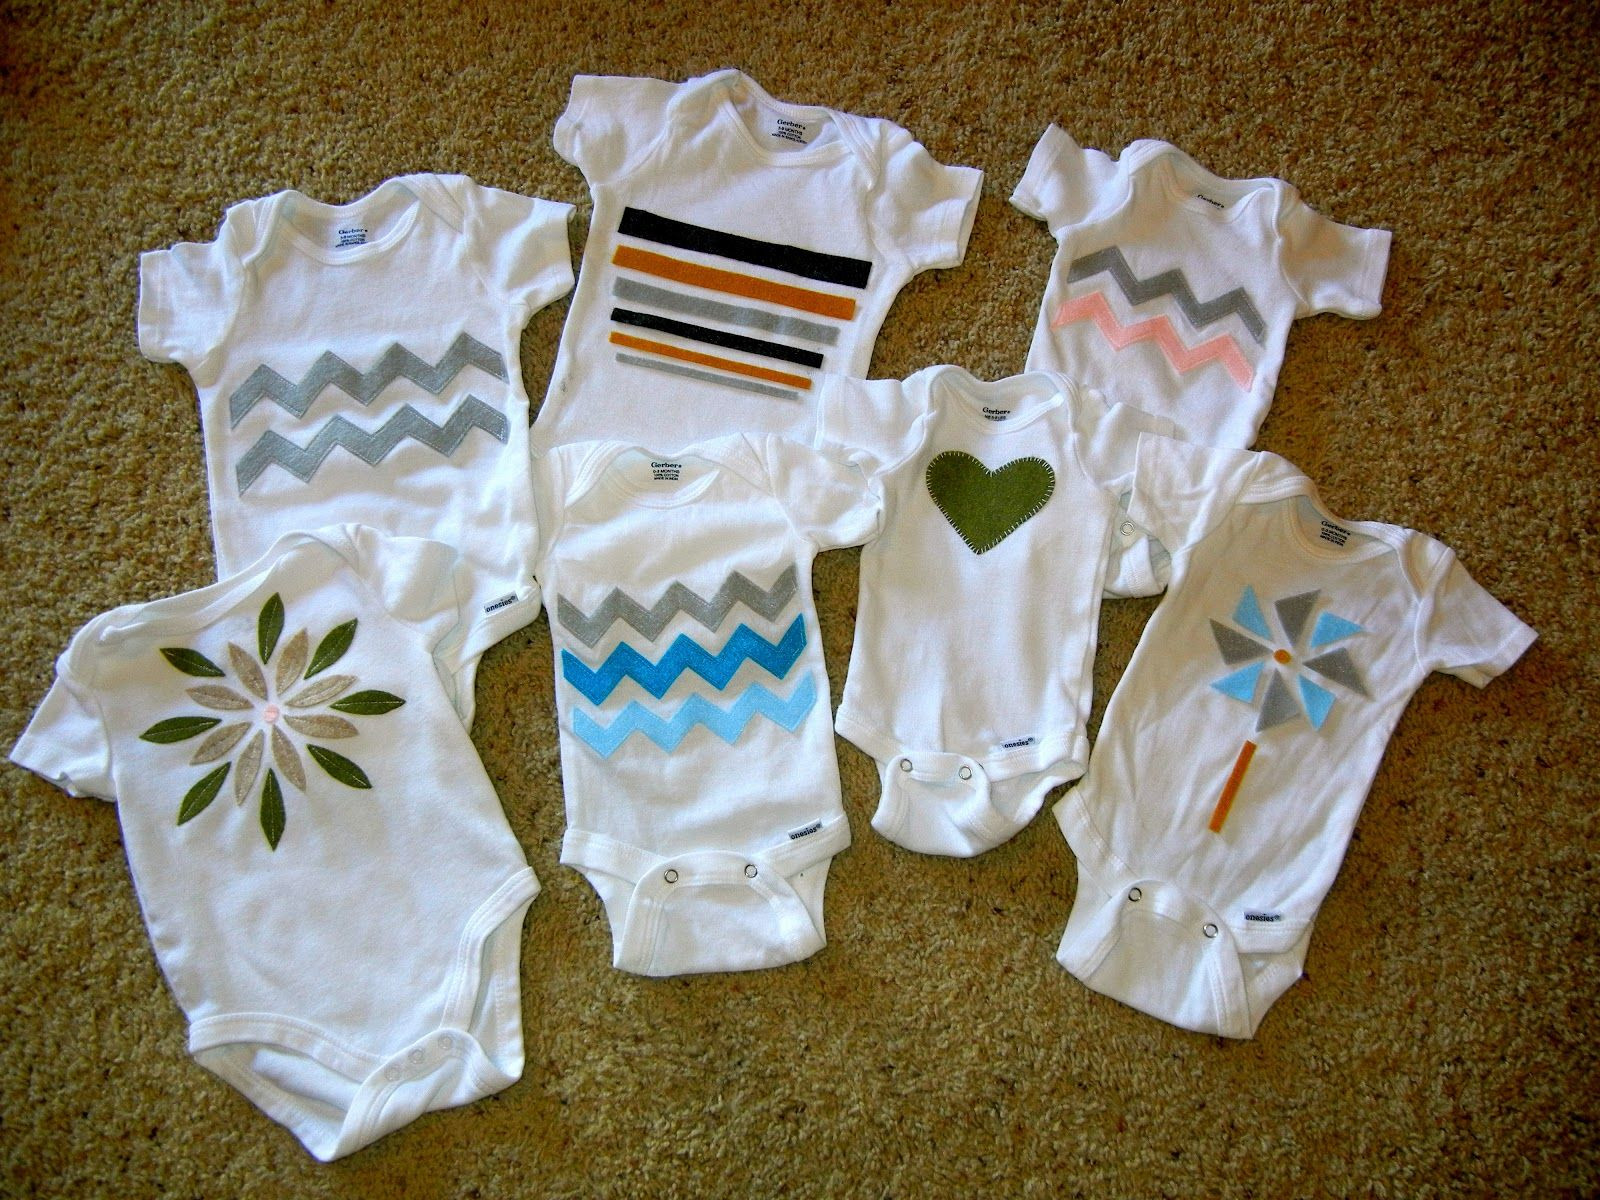 Baby Onesie Ideas For Decorating
 baby shower onesie decorating ideas Homemade esie